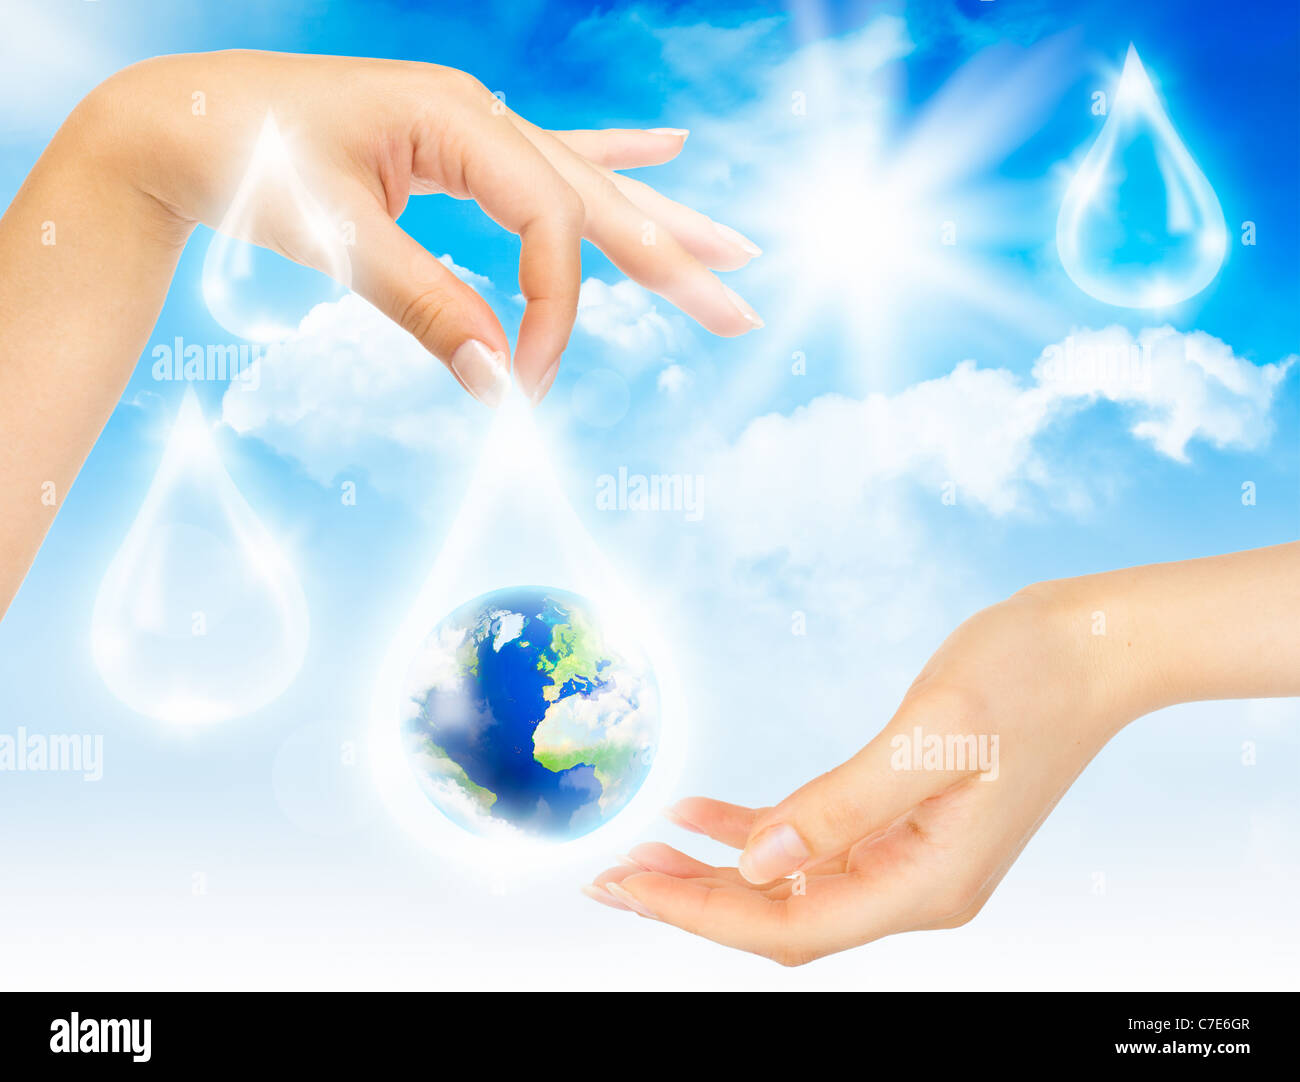 Drop of water with Earth inside and hands on sky background. The symbol of Save Planet. Stock Photo